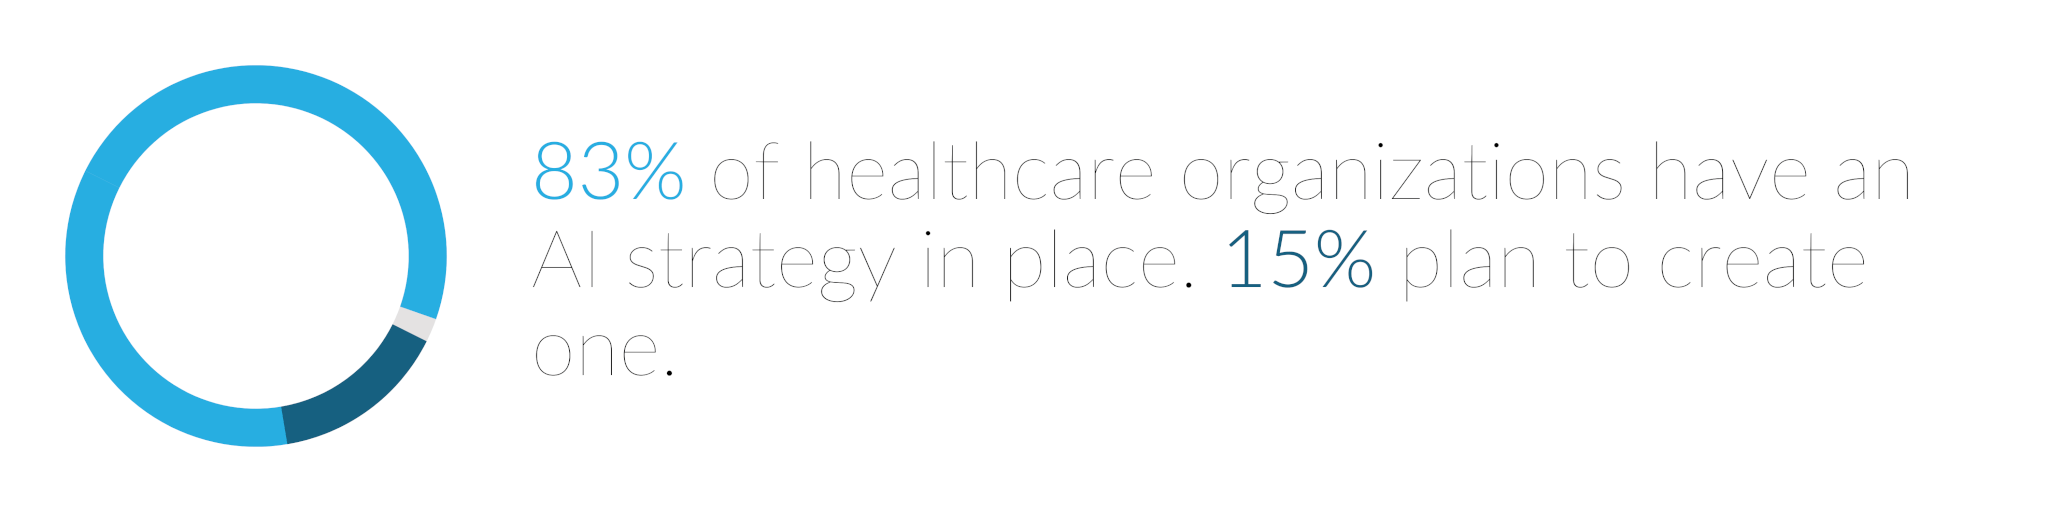 83% of healthcare organizations already have an AI strategy in place to reap the benefits of AI in healthcare, and most others (15%) plan to create one. 